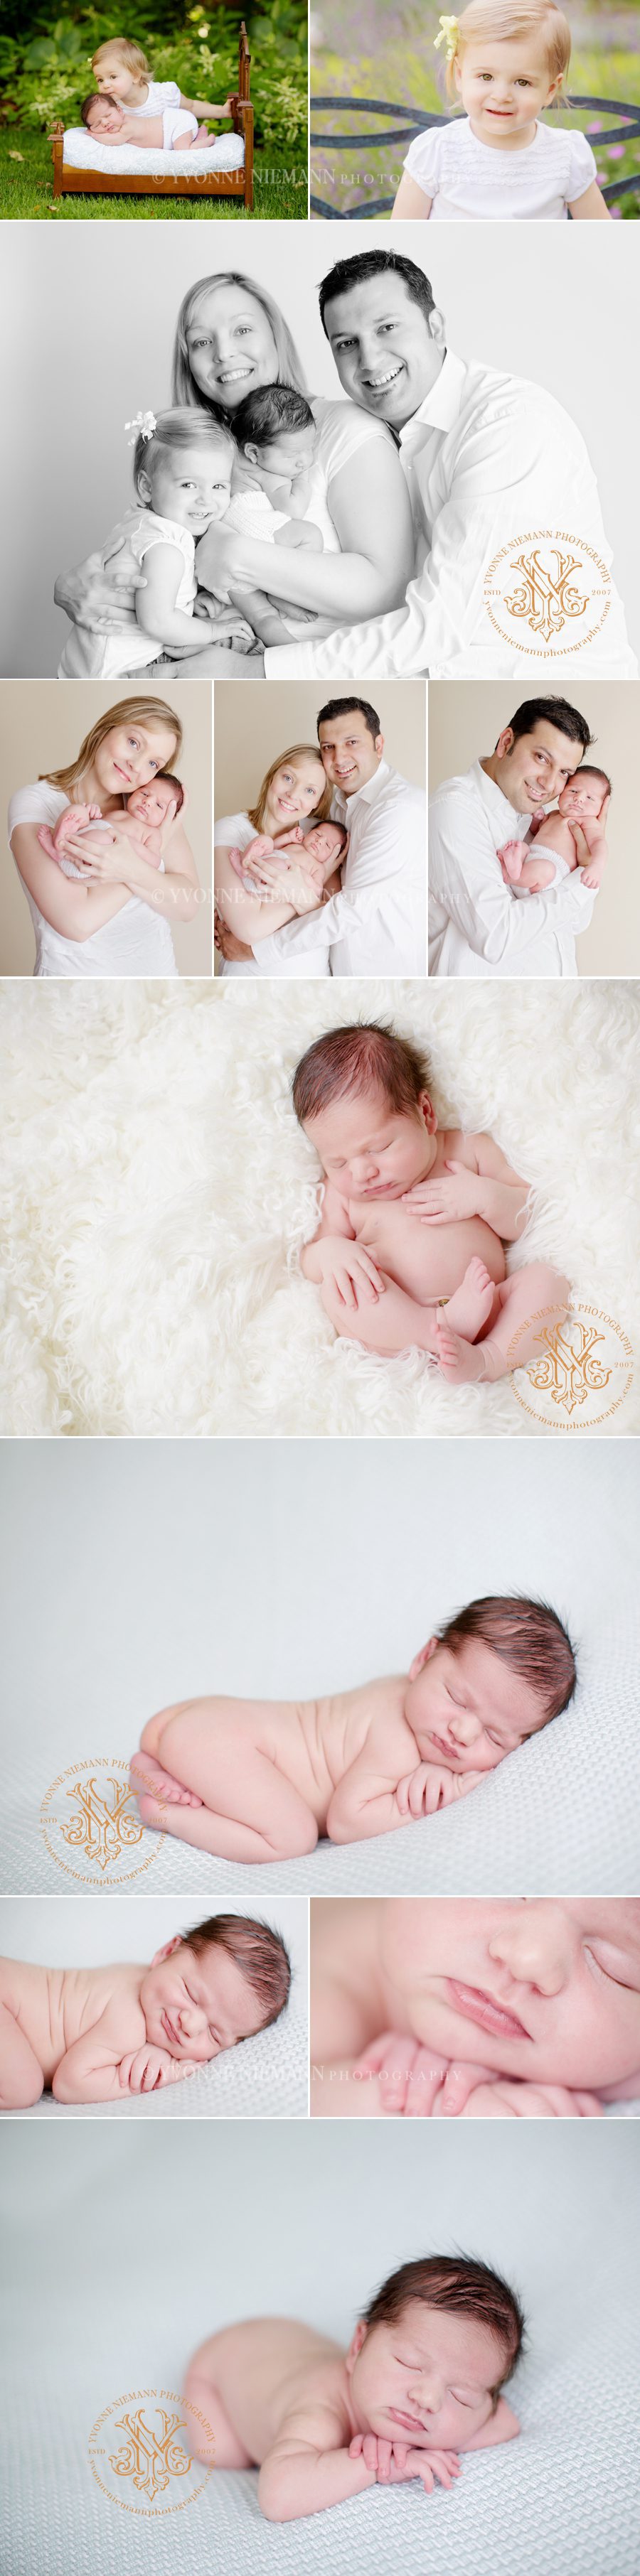 St. Louis newborn photography showing family connections.